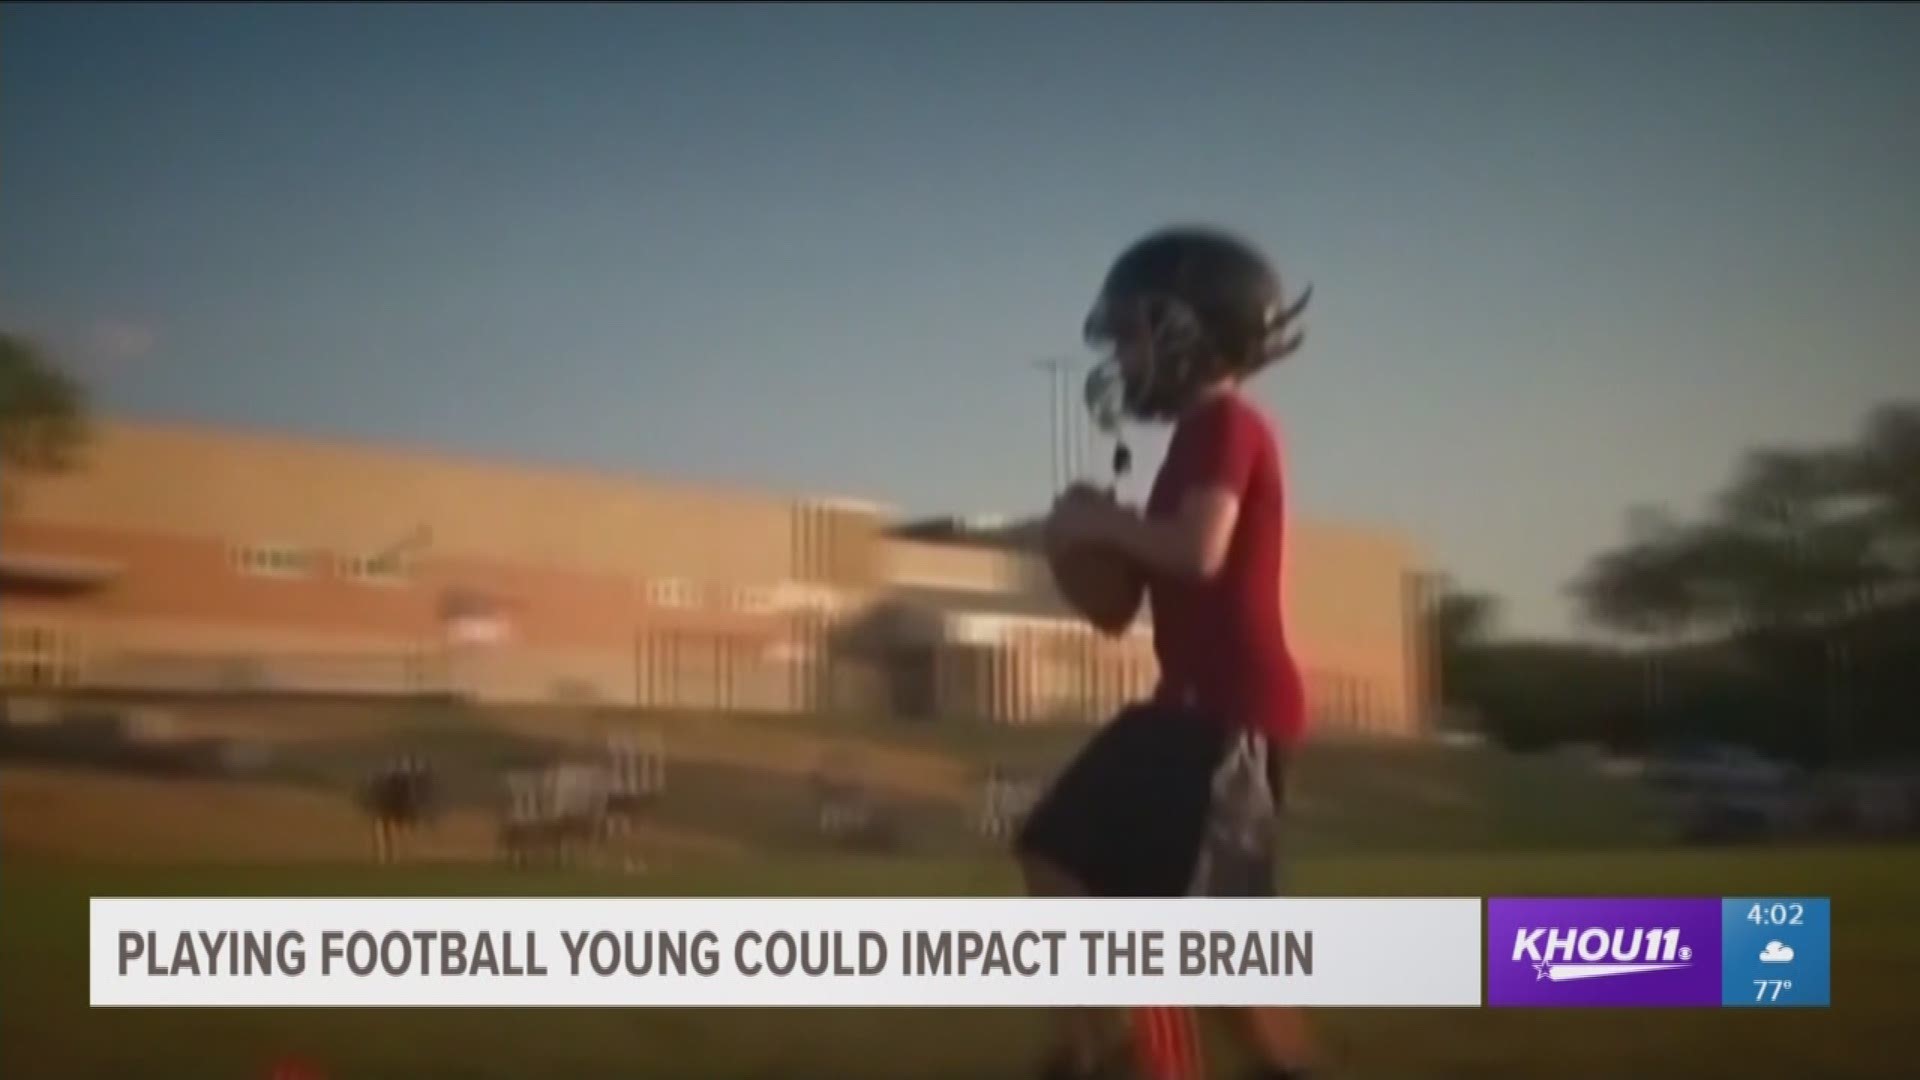 A new study found kids who start playing tackle football before age 12 will, on average, develop cognitive and emotional symptoms associated with the degenerative brain disease CTE much earlier than those who start later.